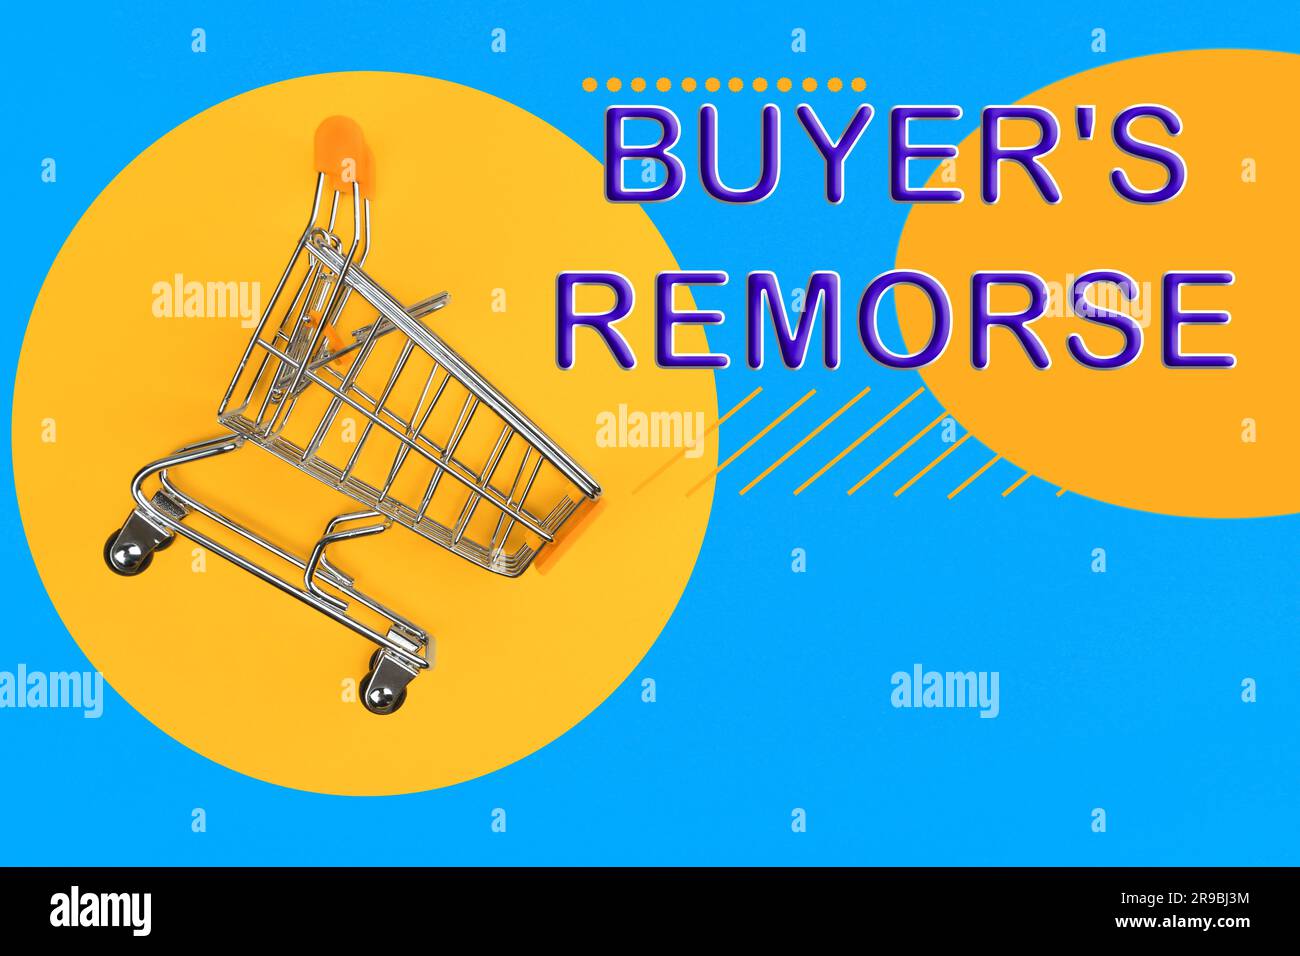 Text Buyer's Remorse and shopping cart on bright yellow and light blue background, top view Stock Photo